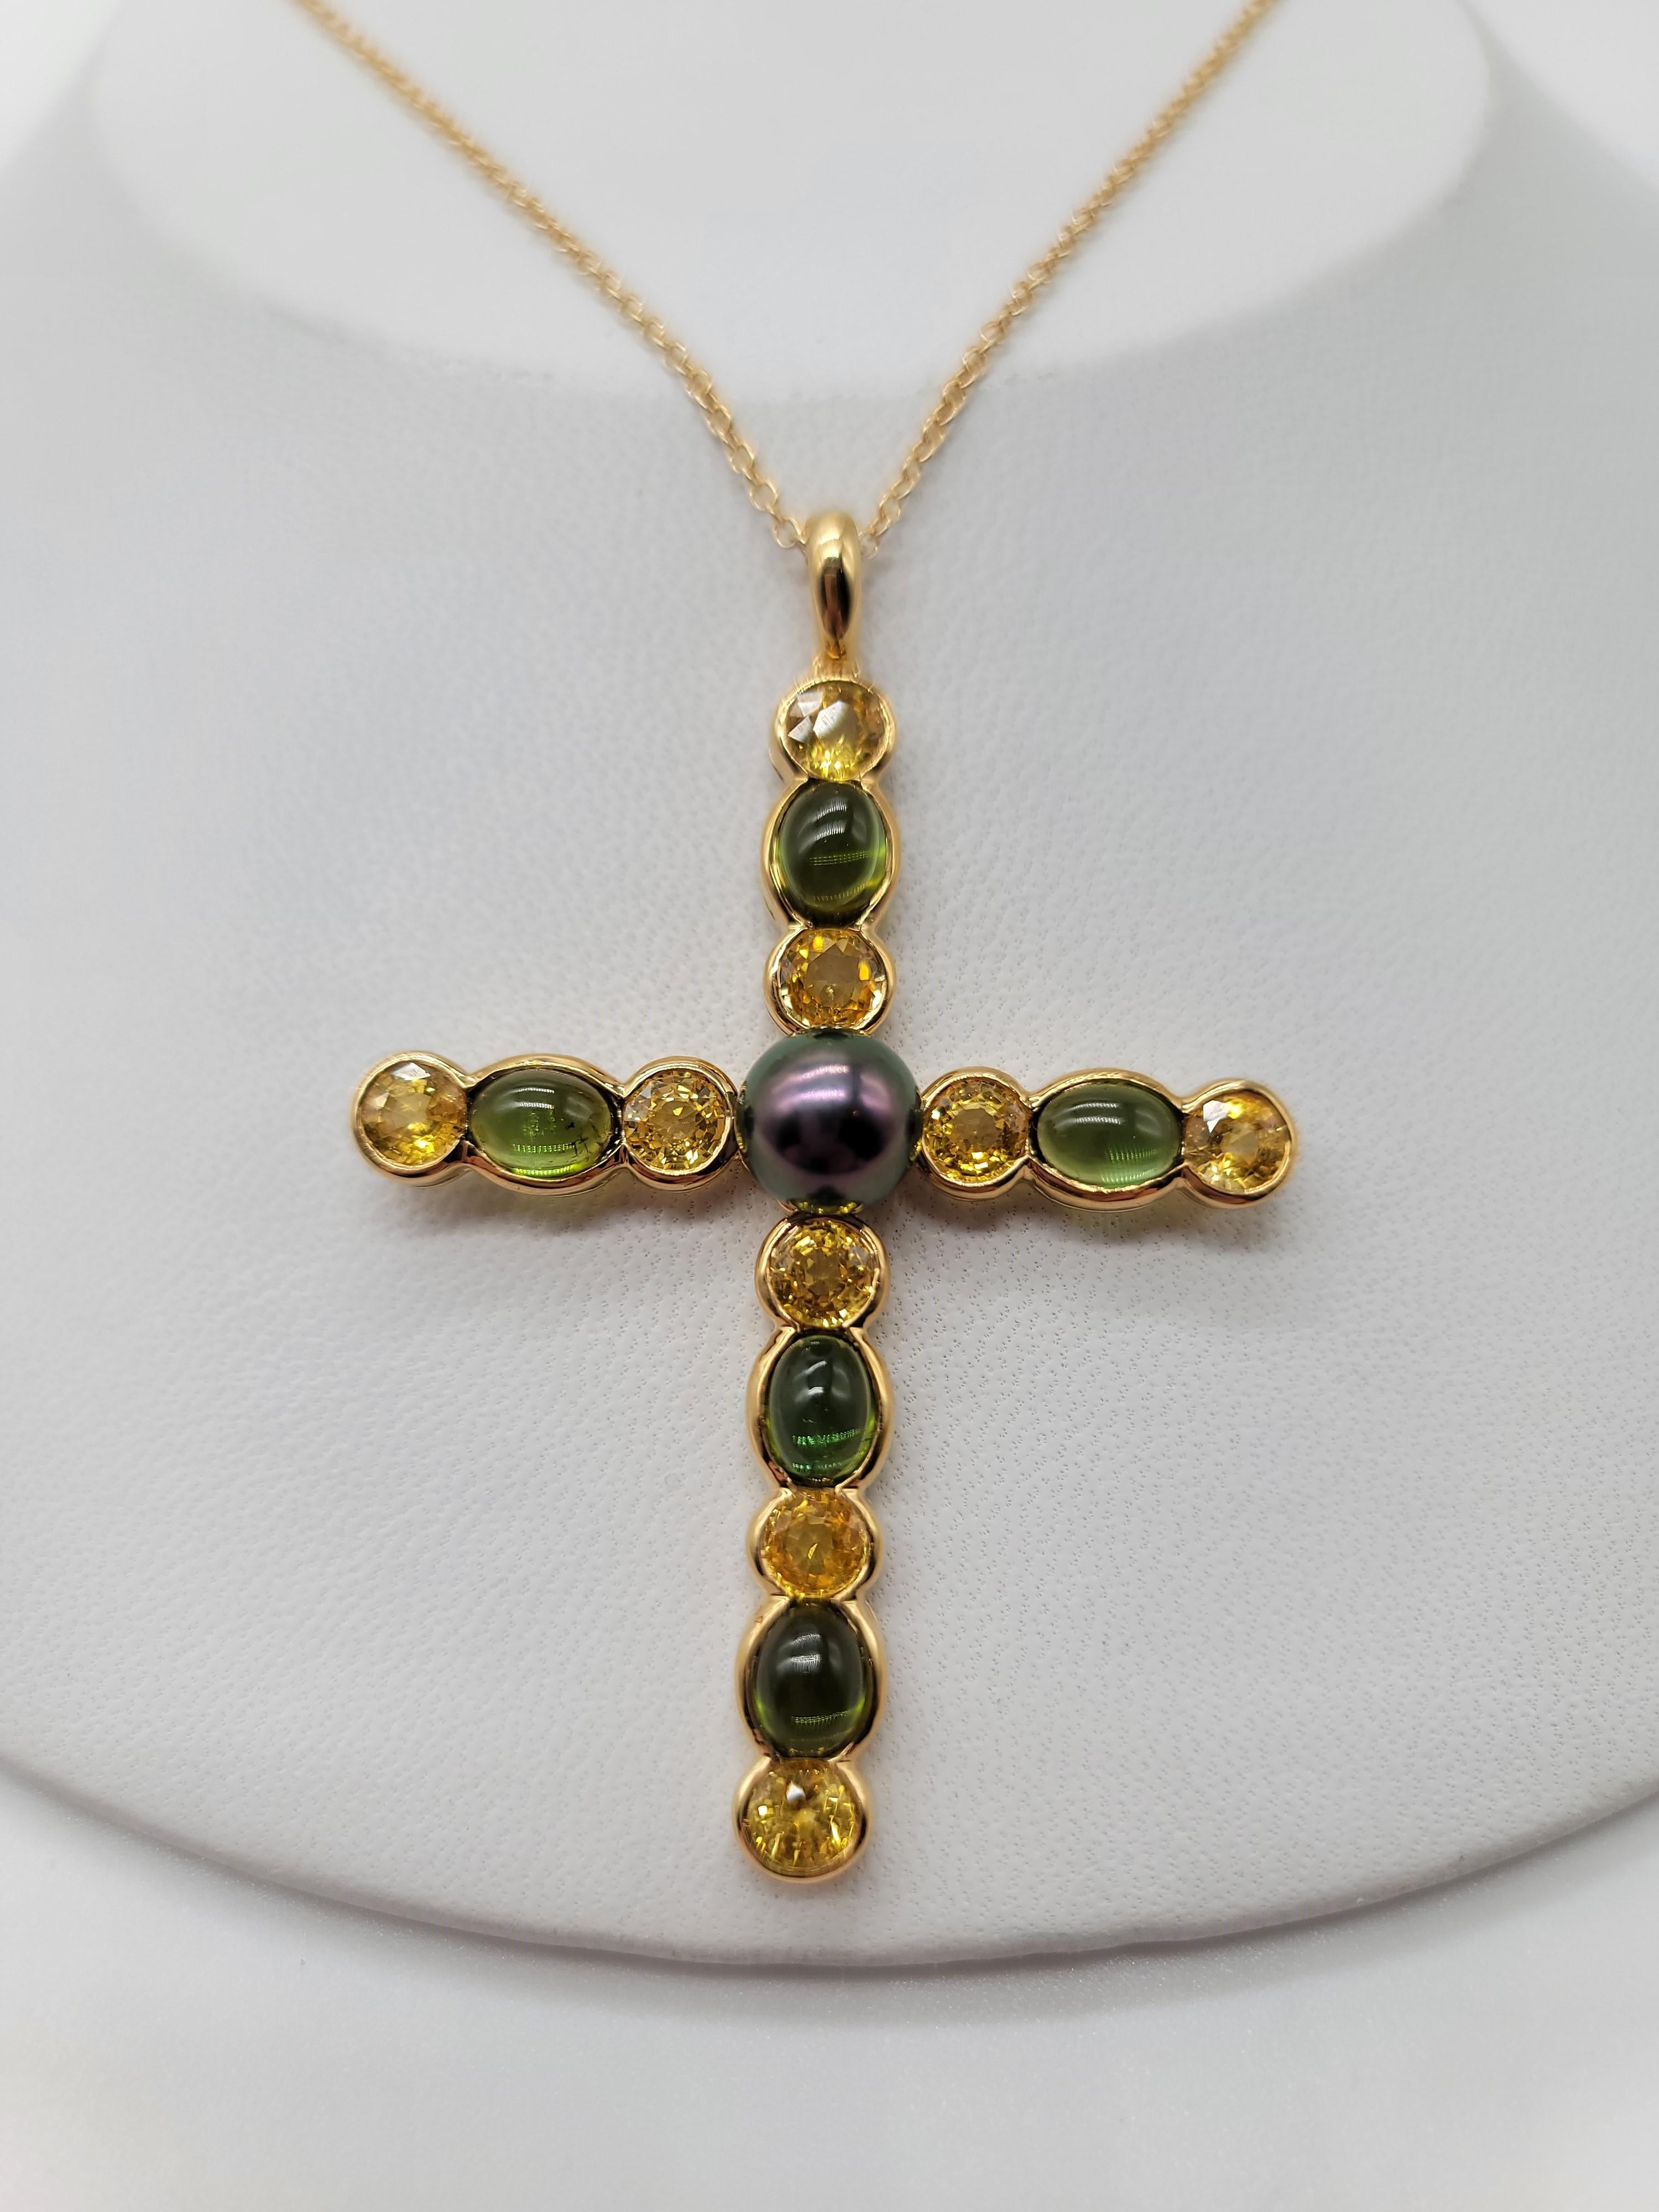 What a show stopper. The combination of 4.33 carats of vivid Cabochon cut Green Tourmalines with 5.13 carats of equally beautiful Yellow Sapphires finished off with a lustrous Black Pearl really makes this piece stand out as unique!!!! Chain